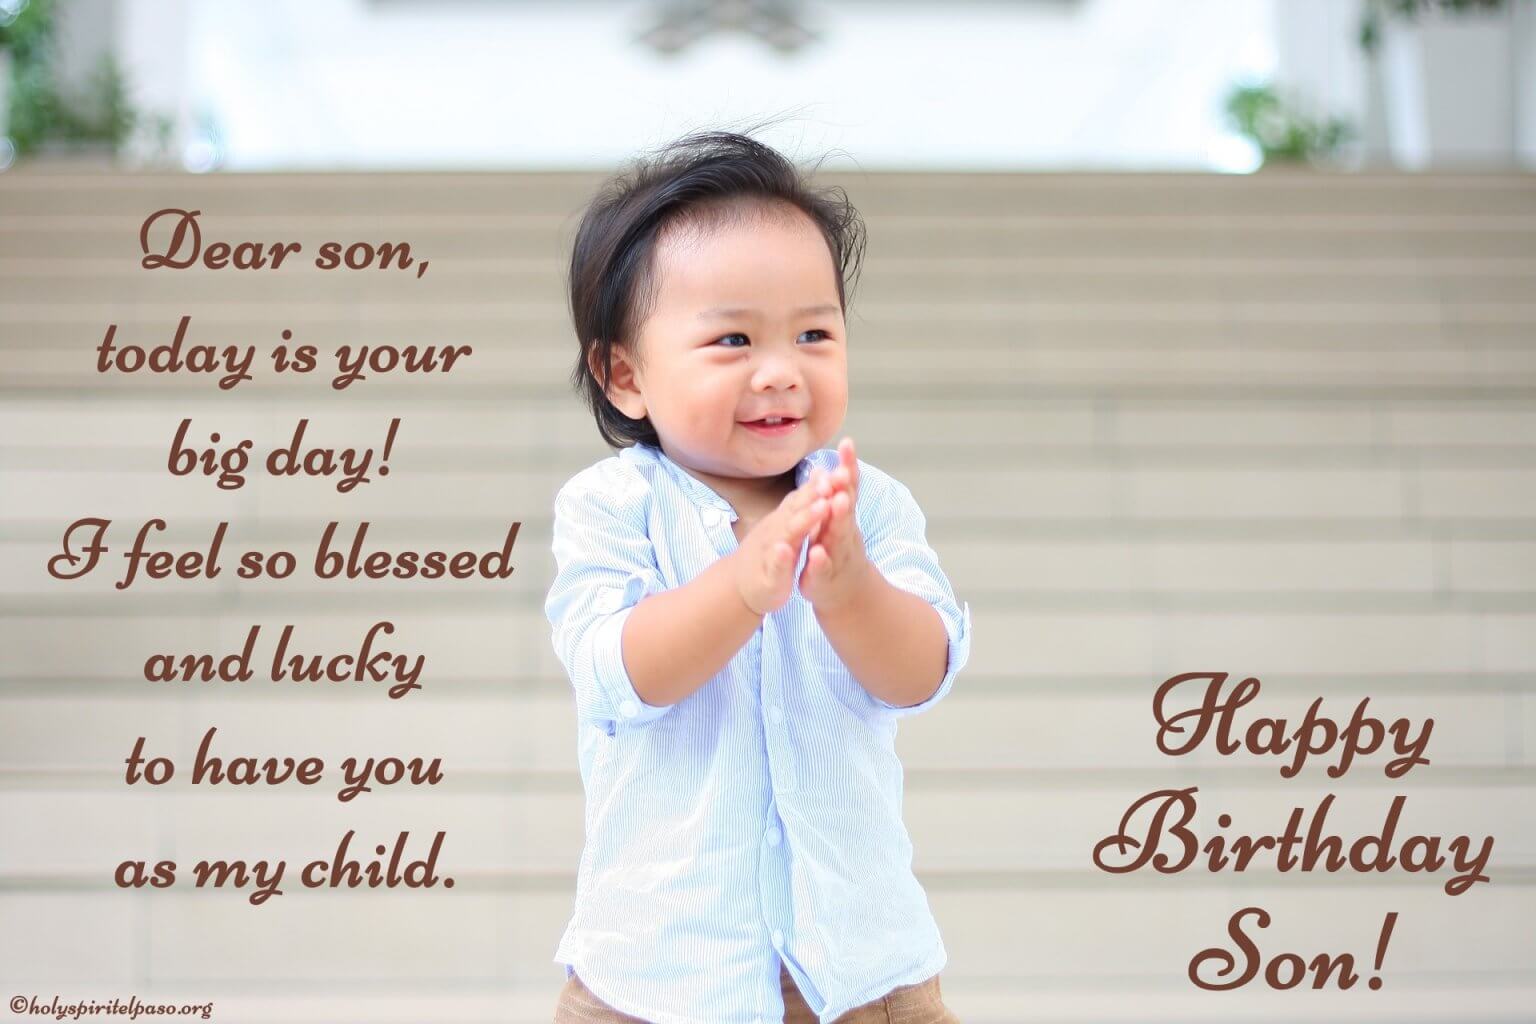 Happy Birthday Son Wishes Quotes Messages For My Son | SexiezPicz Web Porn